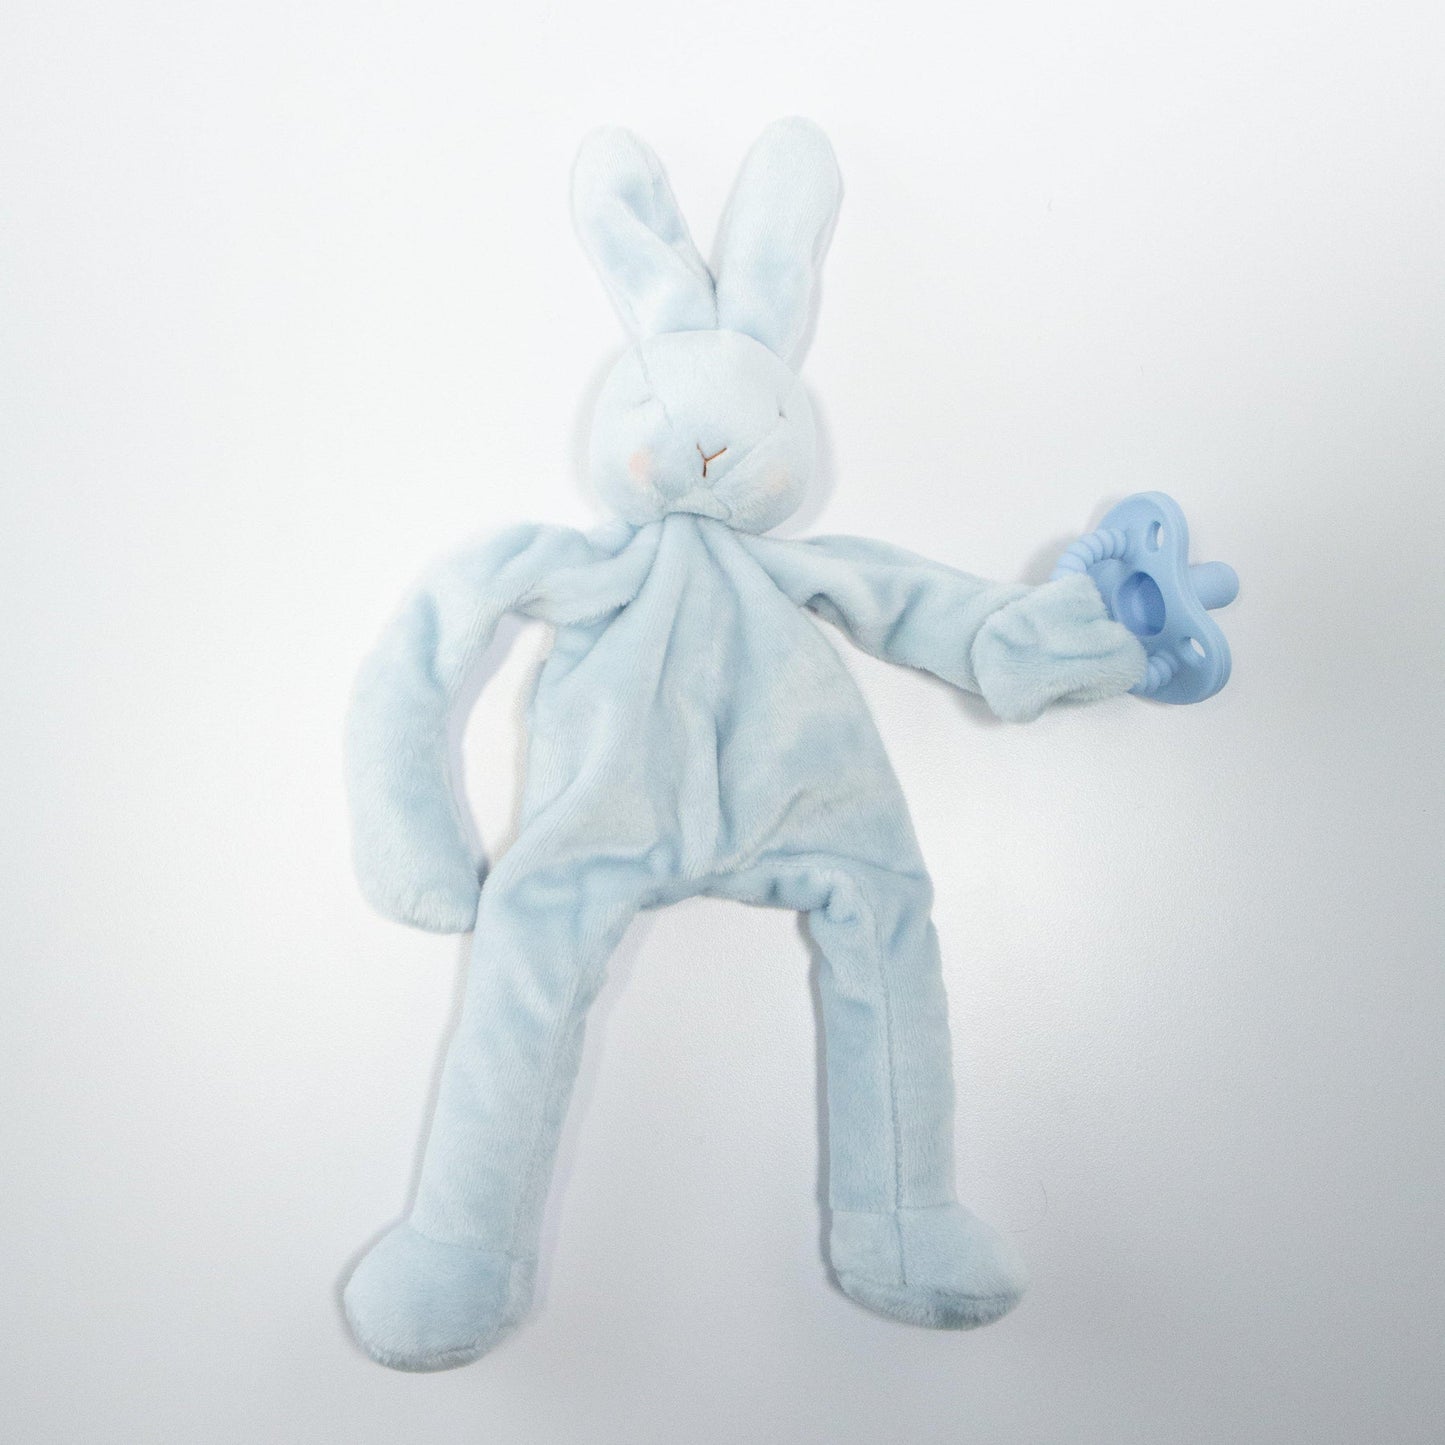 Babies' Blue soft and cuddly bud silly buddy bunny plush toy & pacifier holder - Bunnies by the Bay